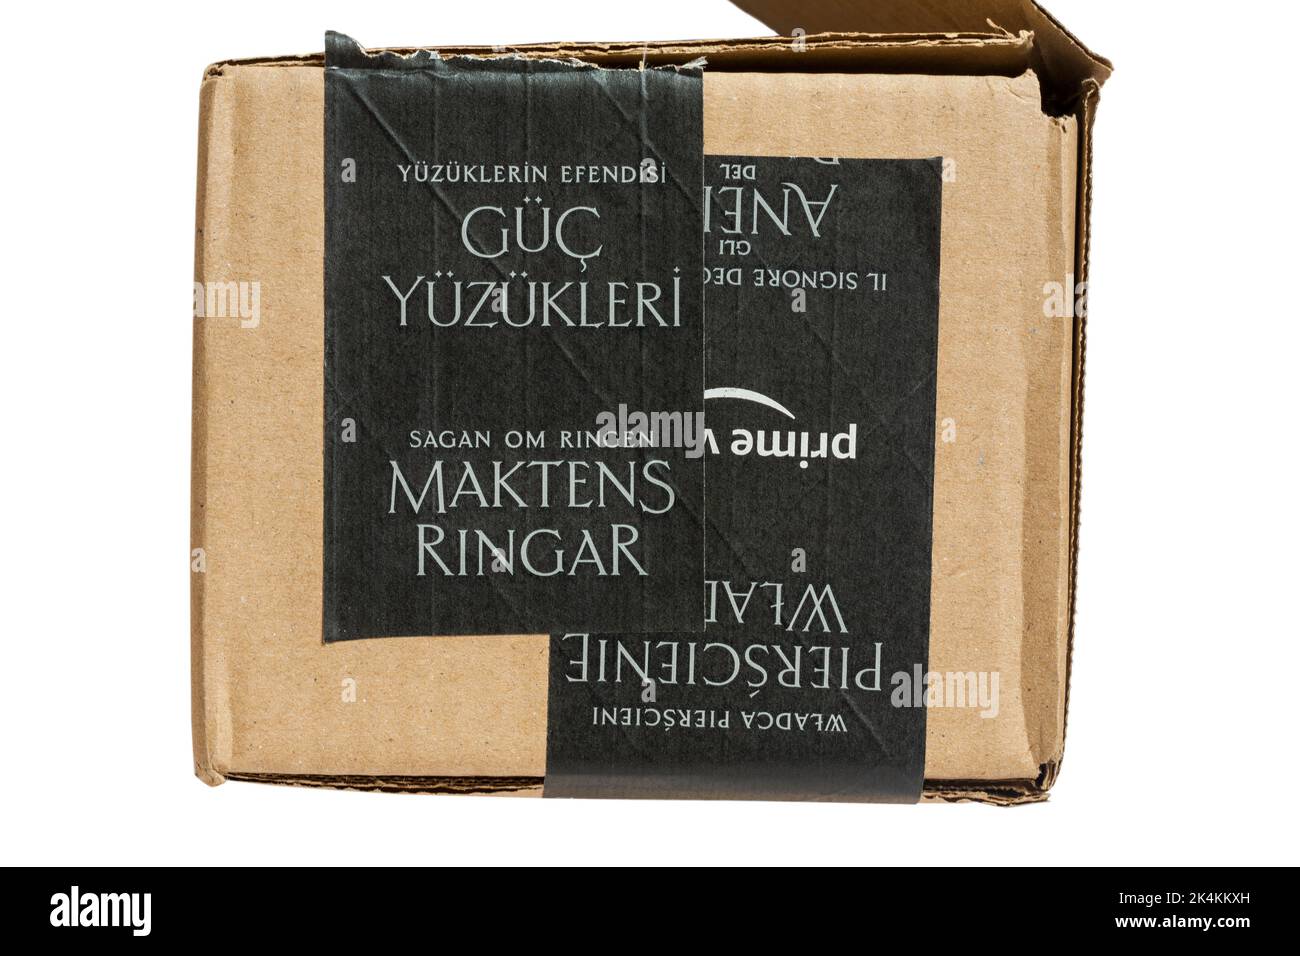 prime video The Lord of the Rings the Rings of Power tape in different languages on parcel from Amazon Stock Photo